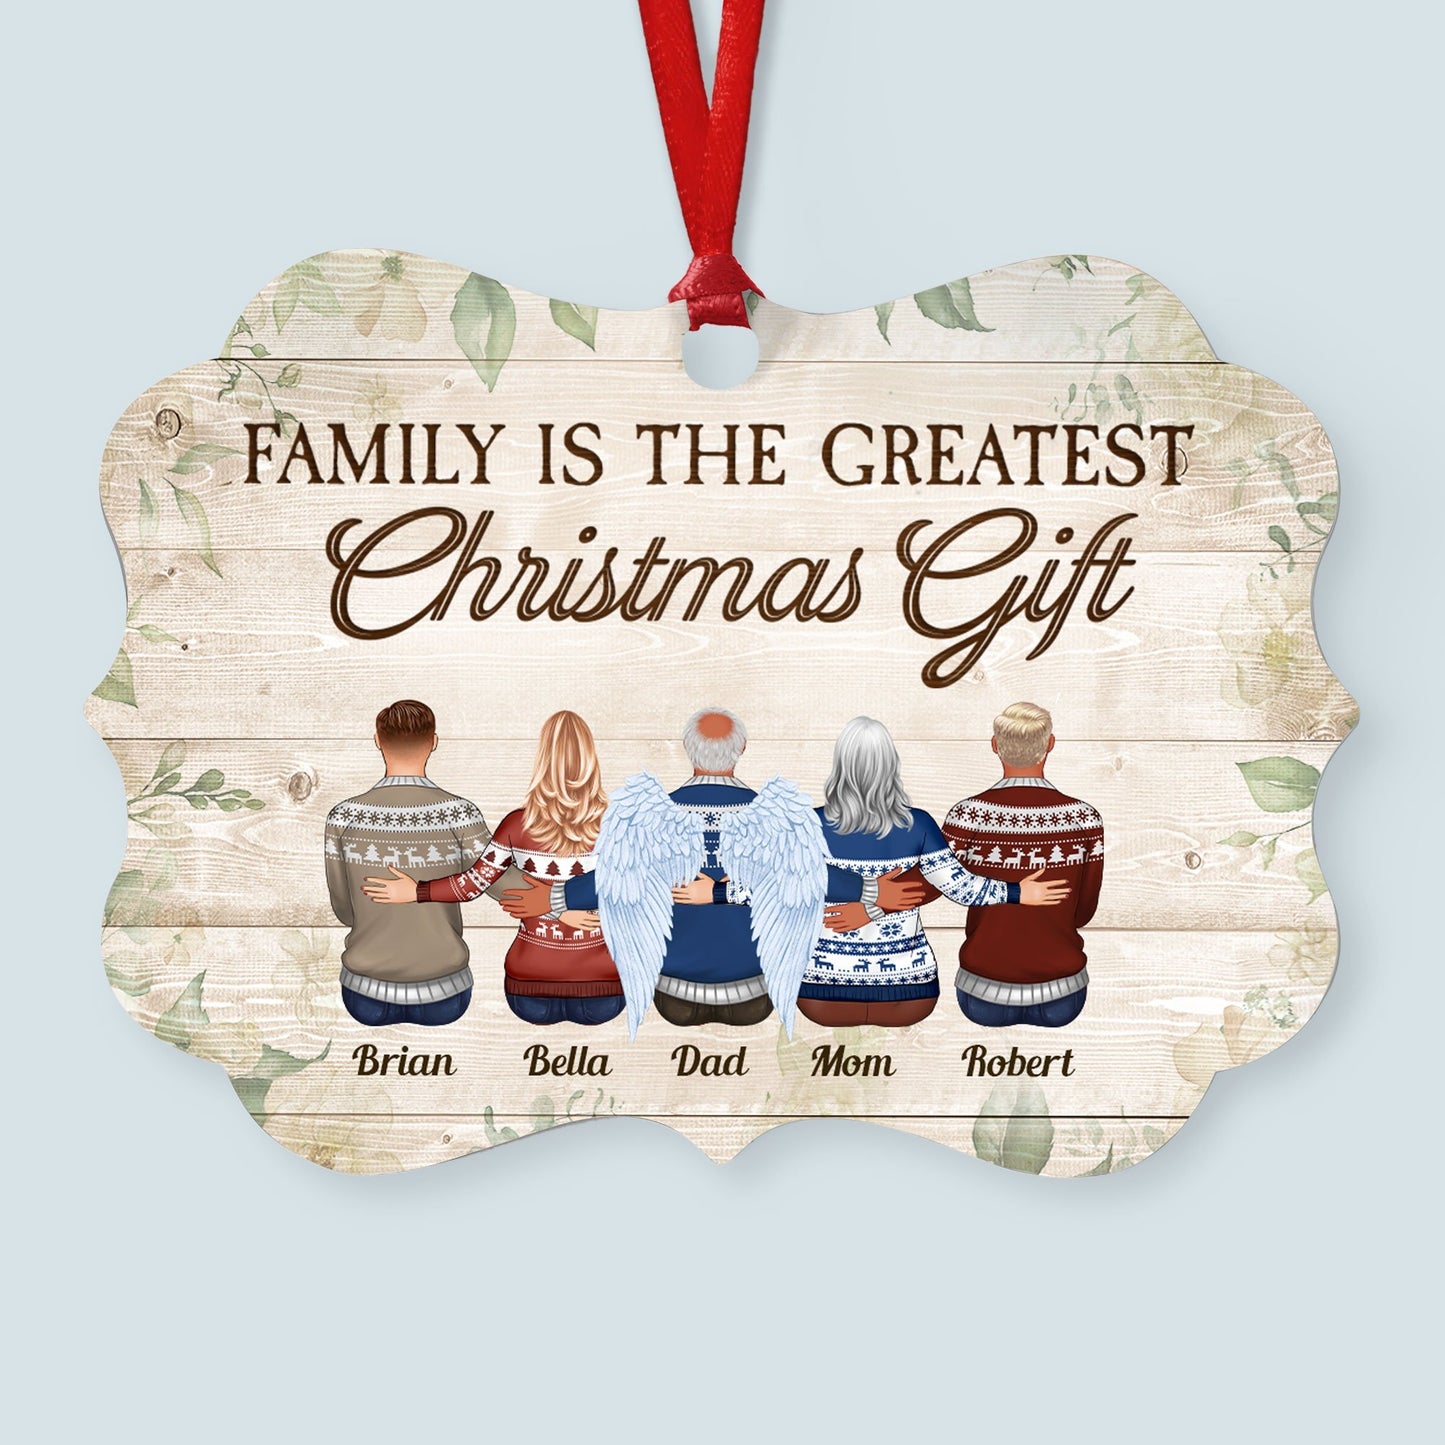 Because Someone We Love Is In Heaven - Personalized Aluminum/Wooden Ornament - Christmas Gift For Family With Lost Ones, Memorial Ornament - Family Hugging